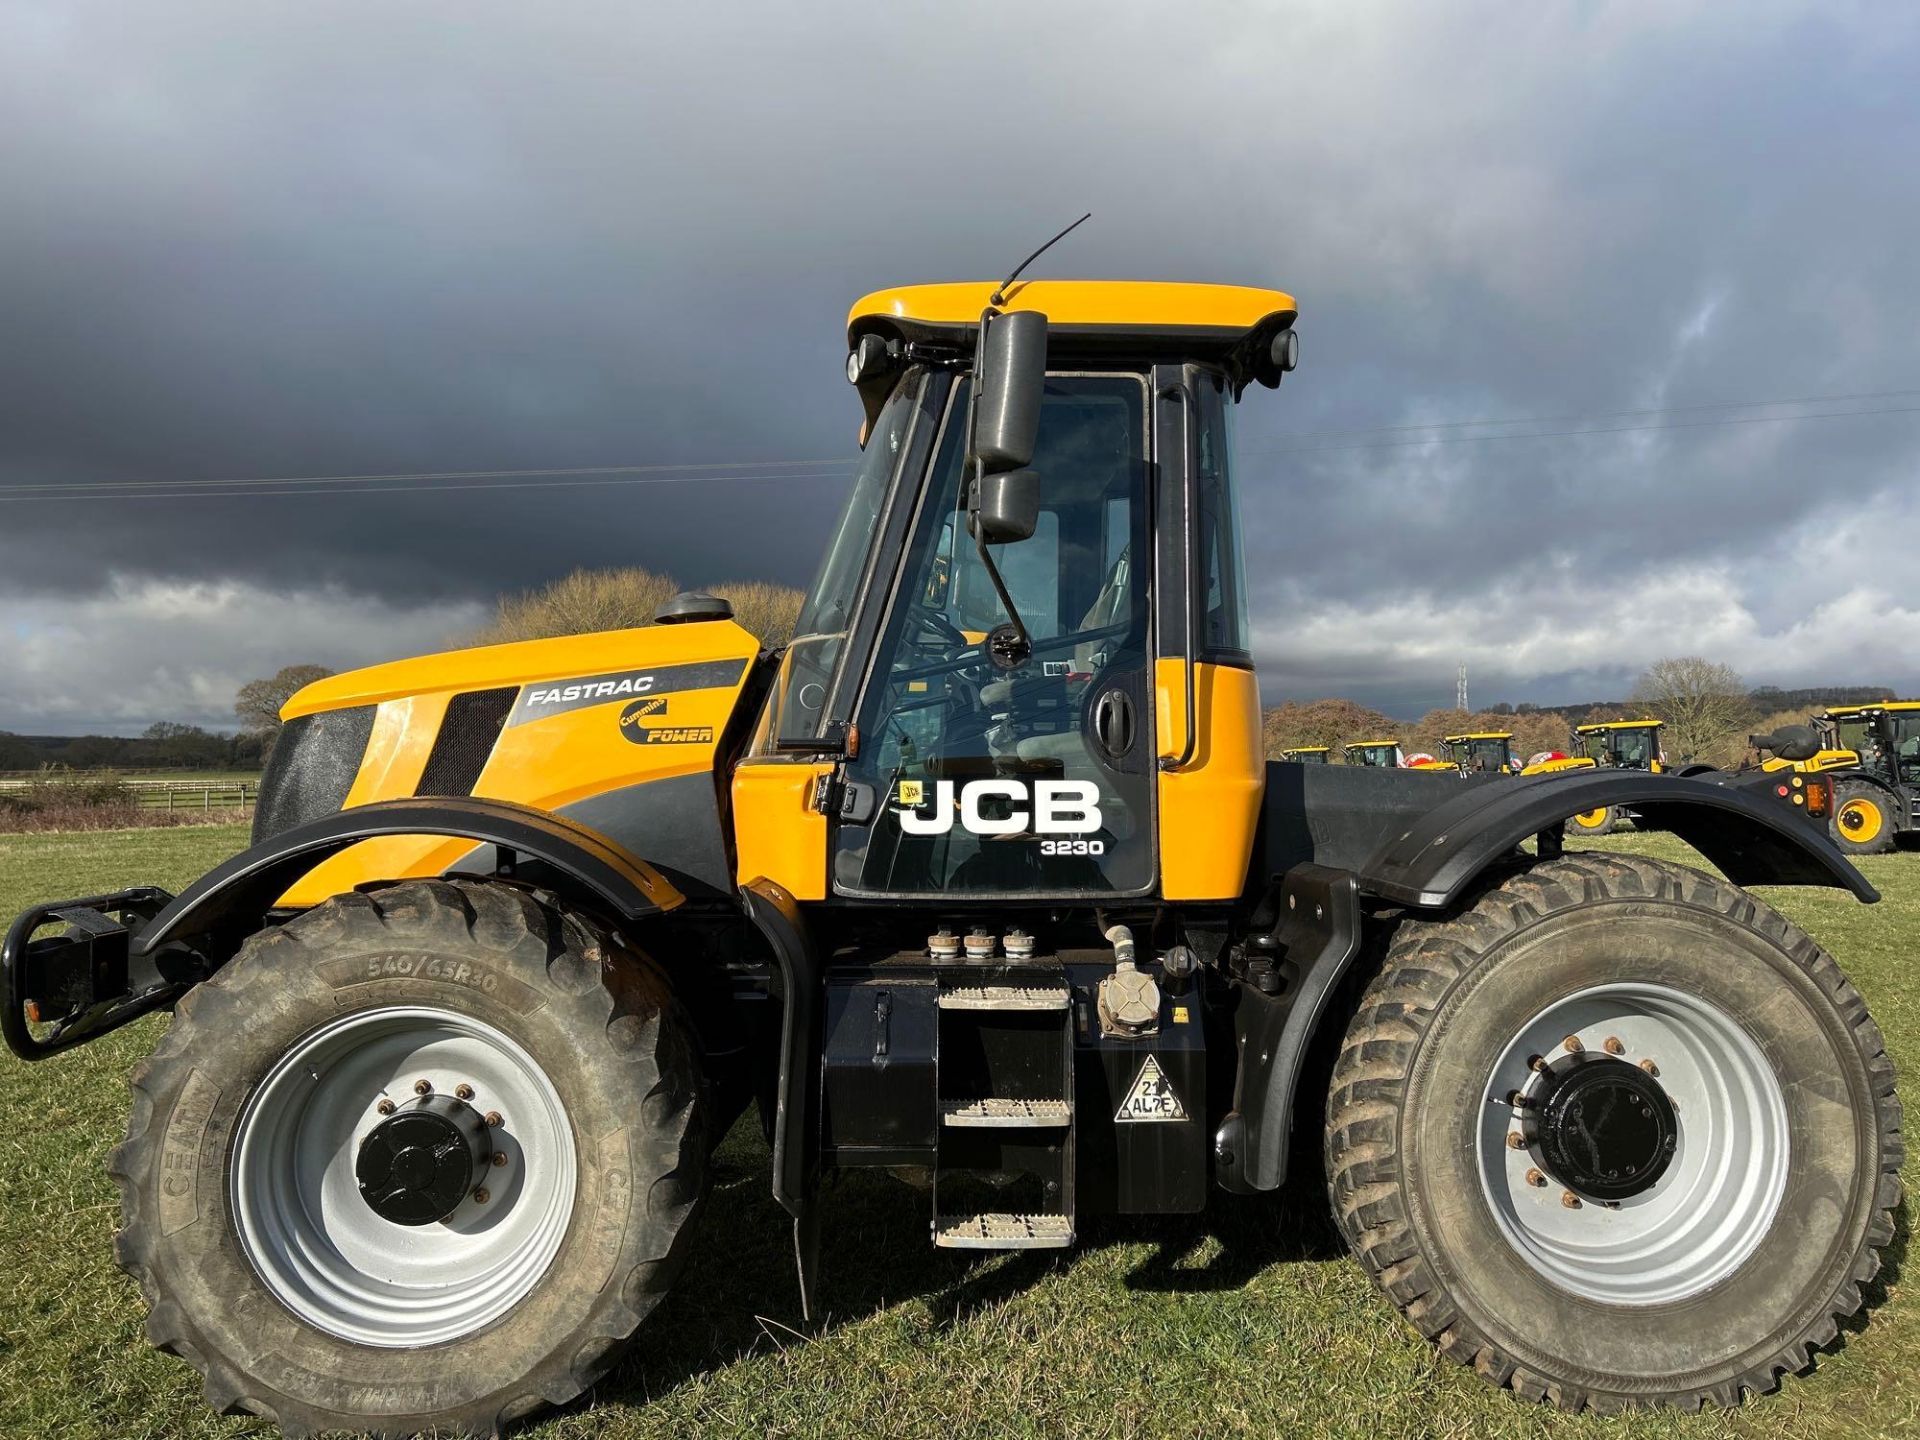 2009 JCB Fastrac 3230 with plus pack, 65kph, 3 rear spool valves. Datatagged. On Ceat 540/65R30 fron - Image 2 of 13